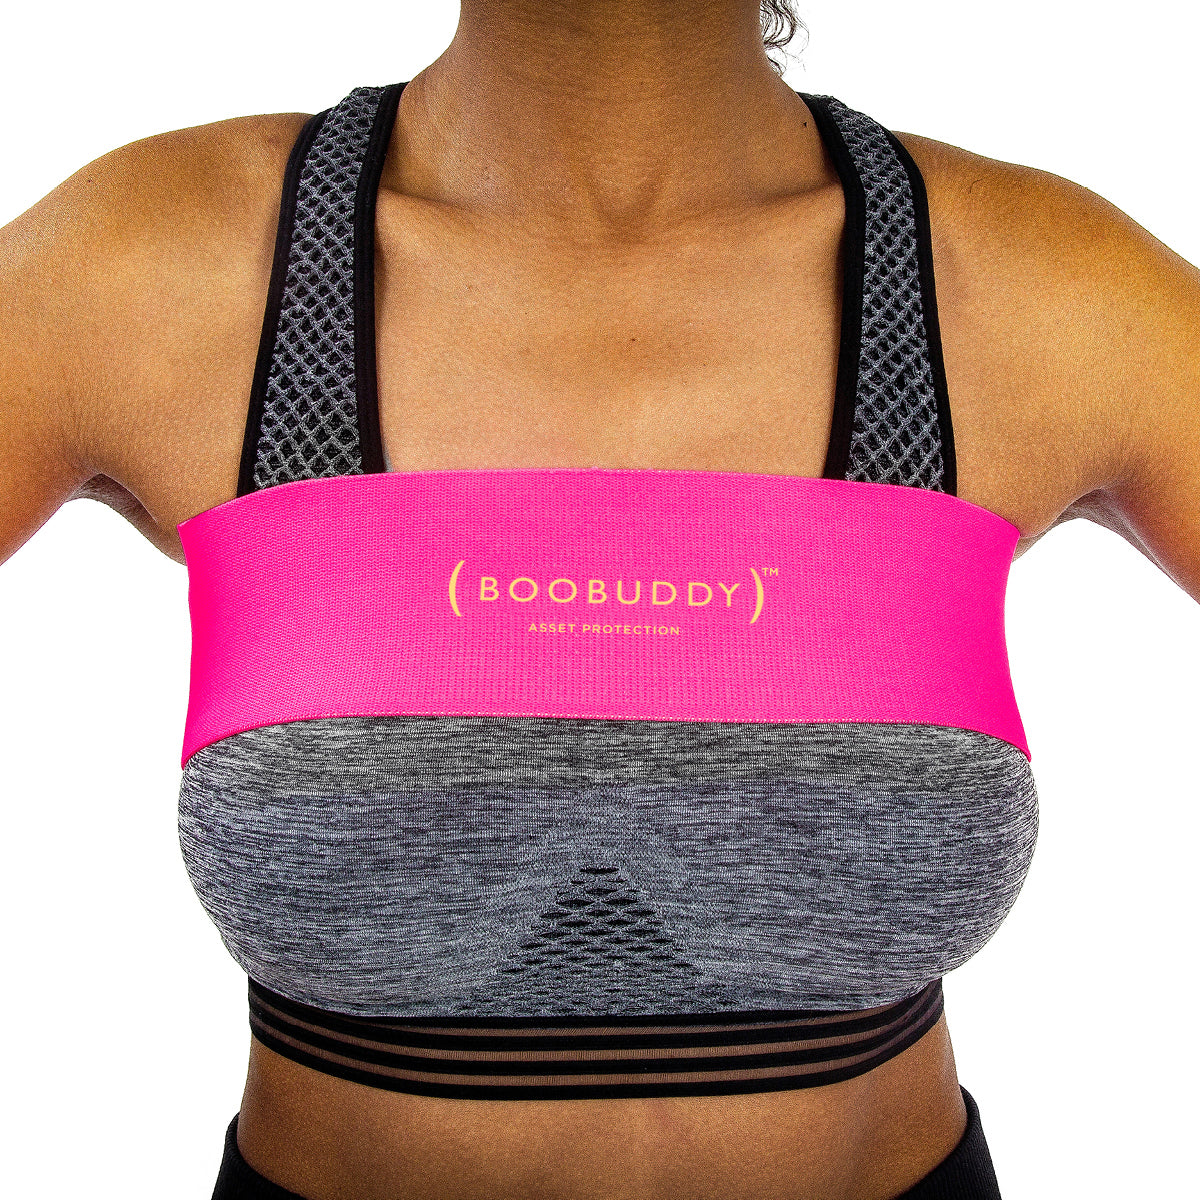 Boobuddy Adjustable Breast Support Band | Pink | How to Wear a Boobuddy